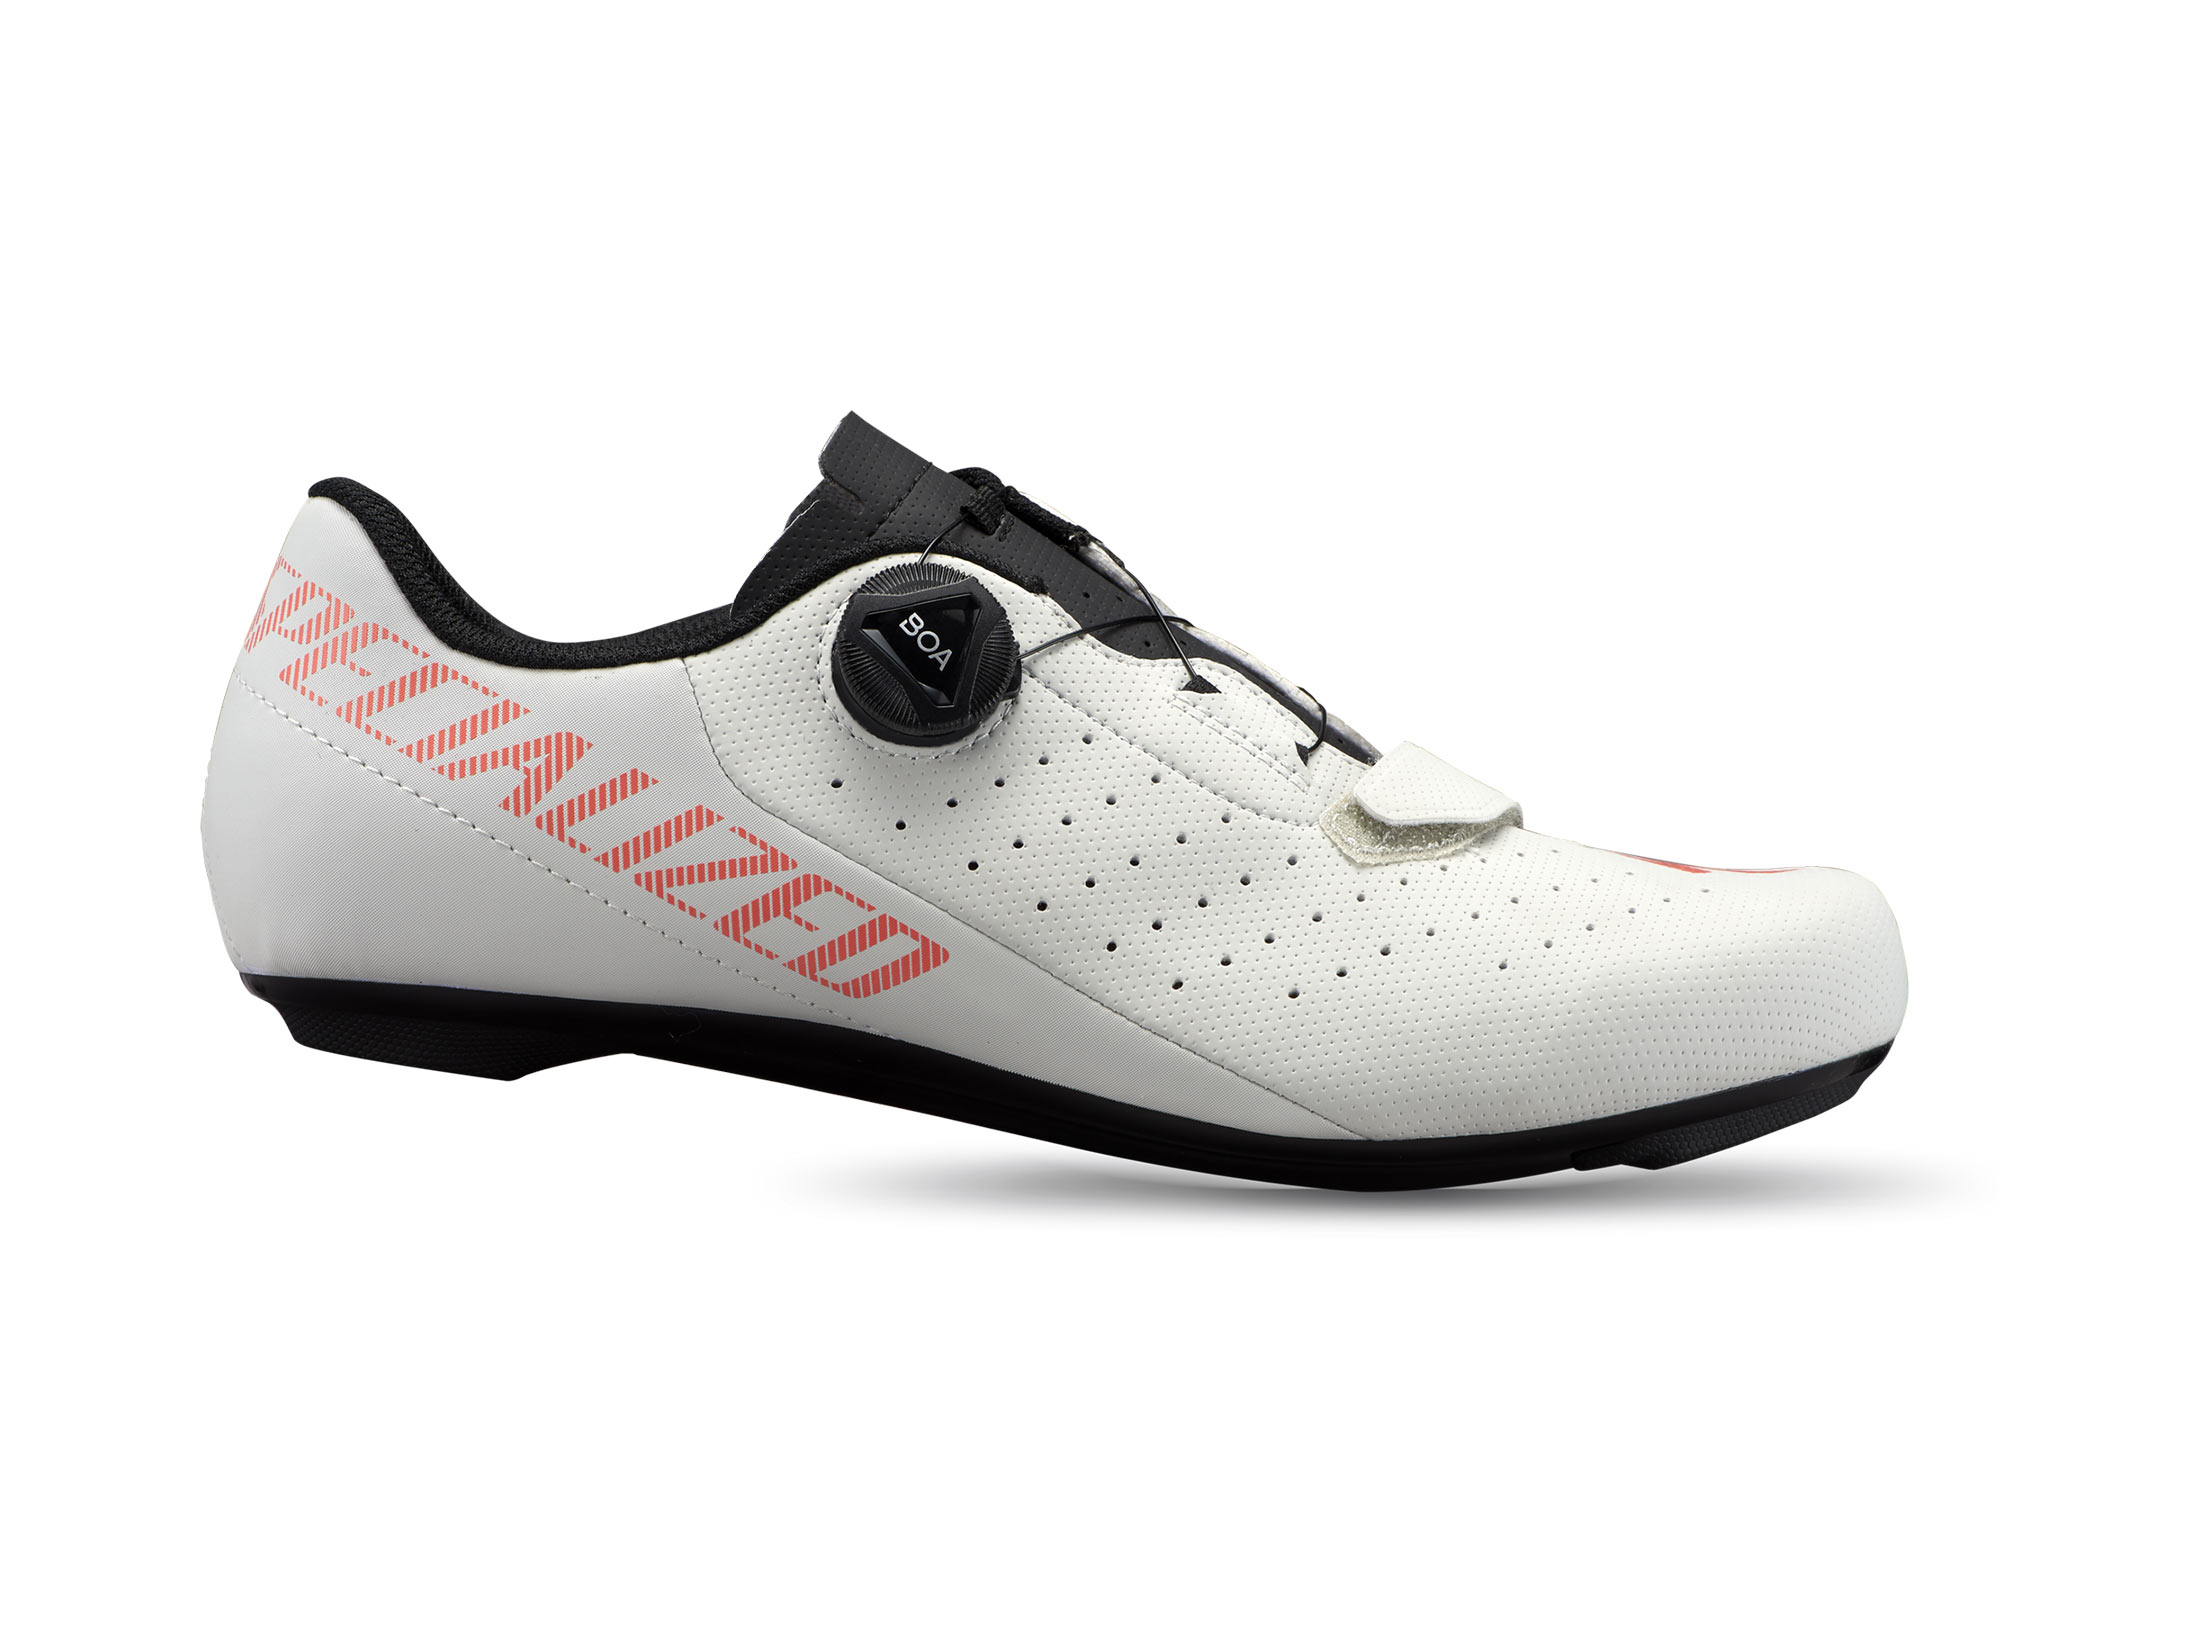 Specialized Torch 1.0 Road Shoes - Dove Grey / Vivid Coral